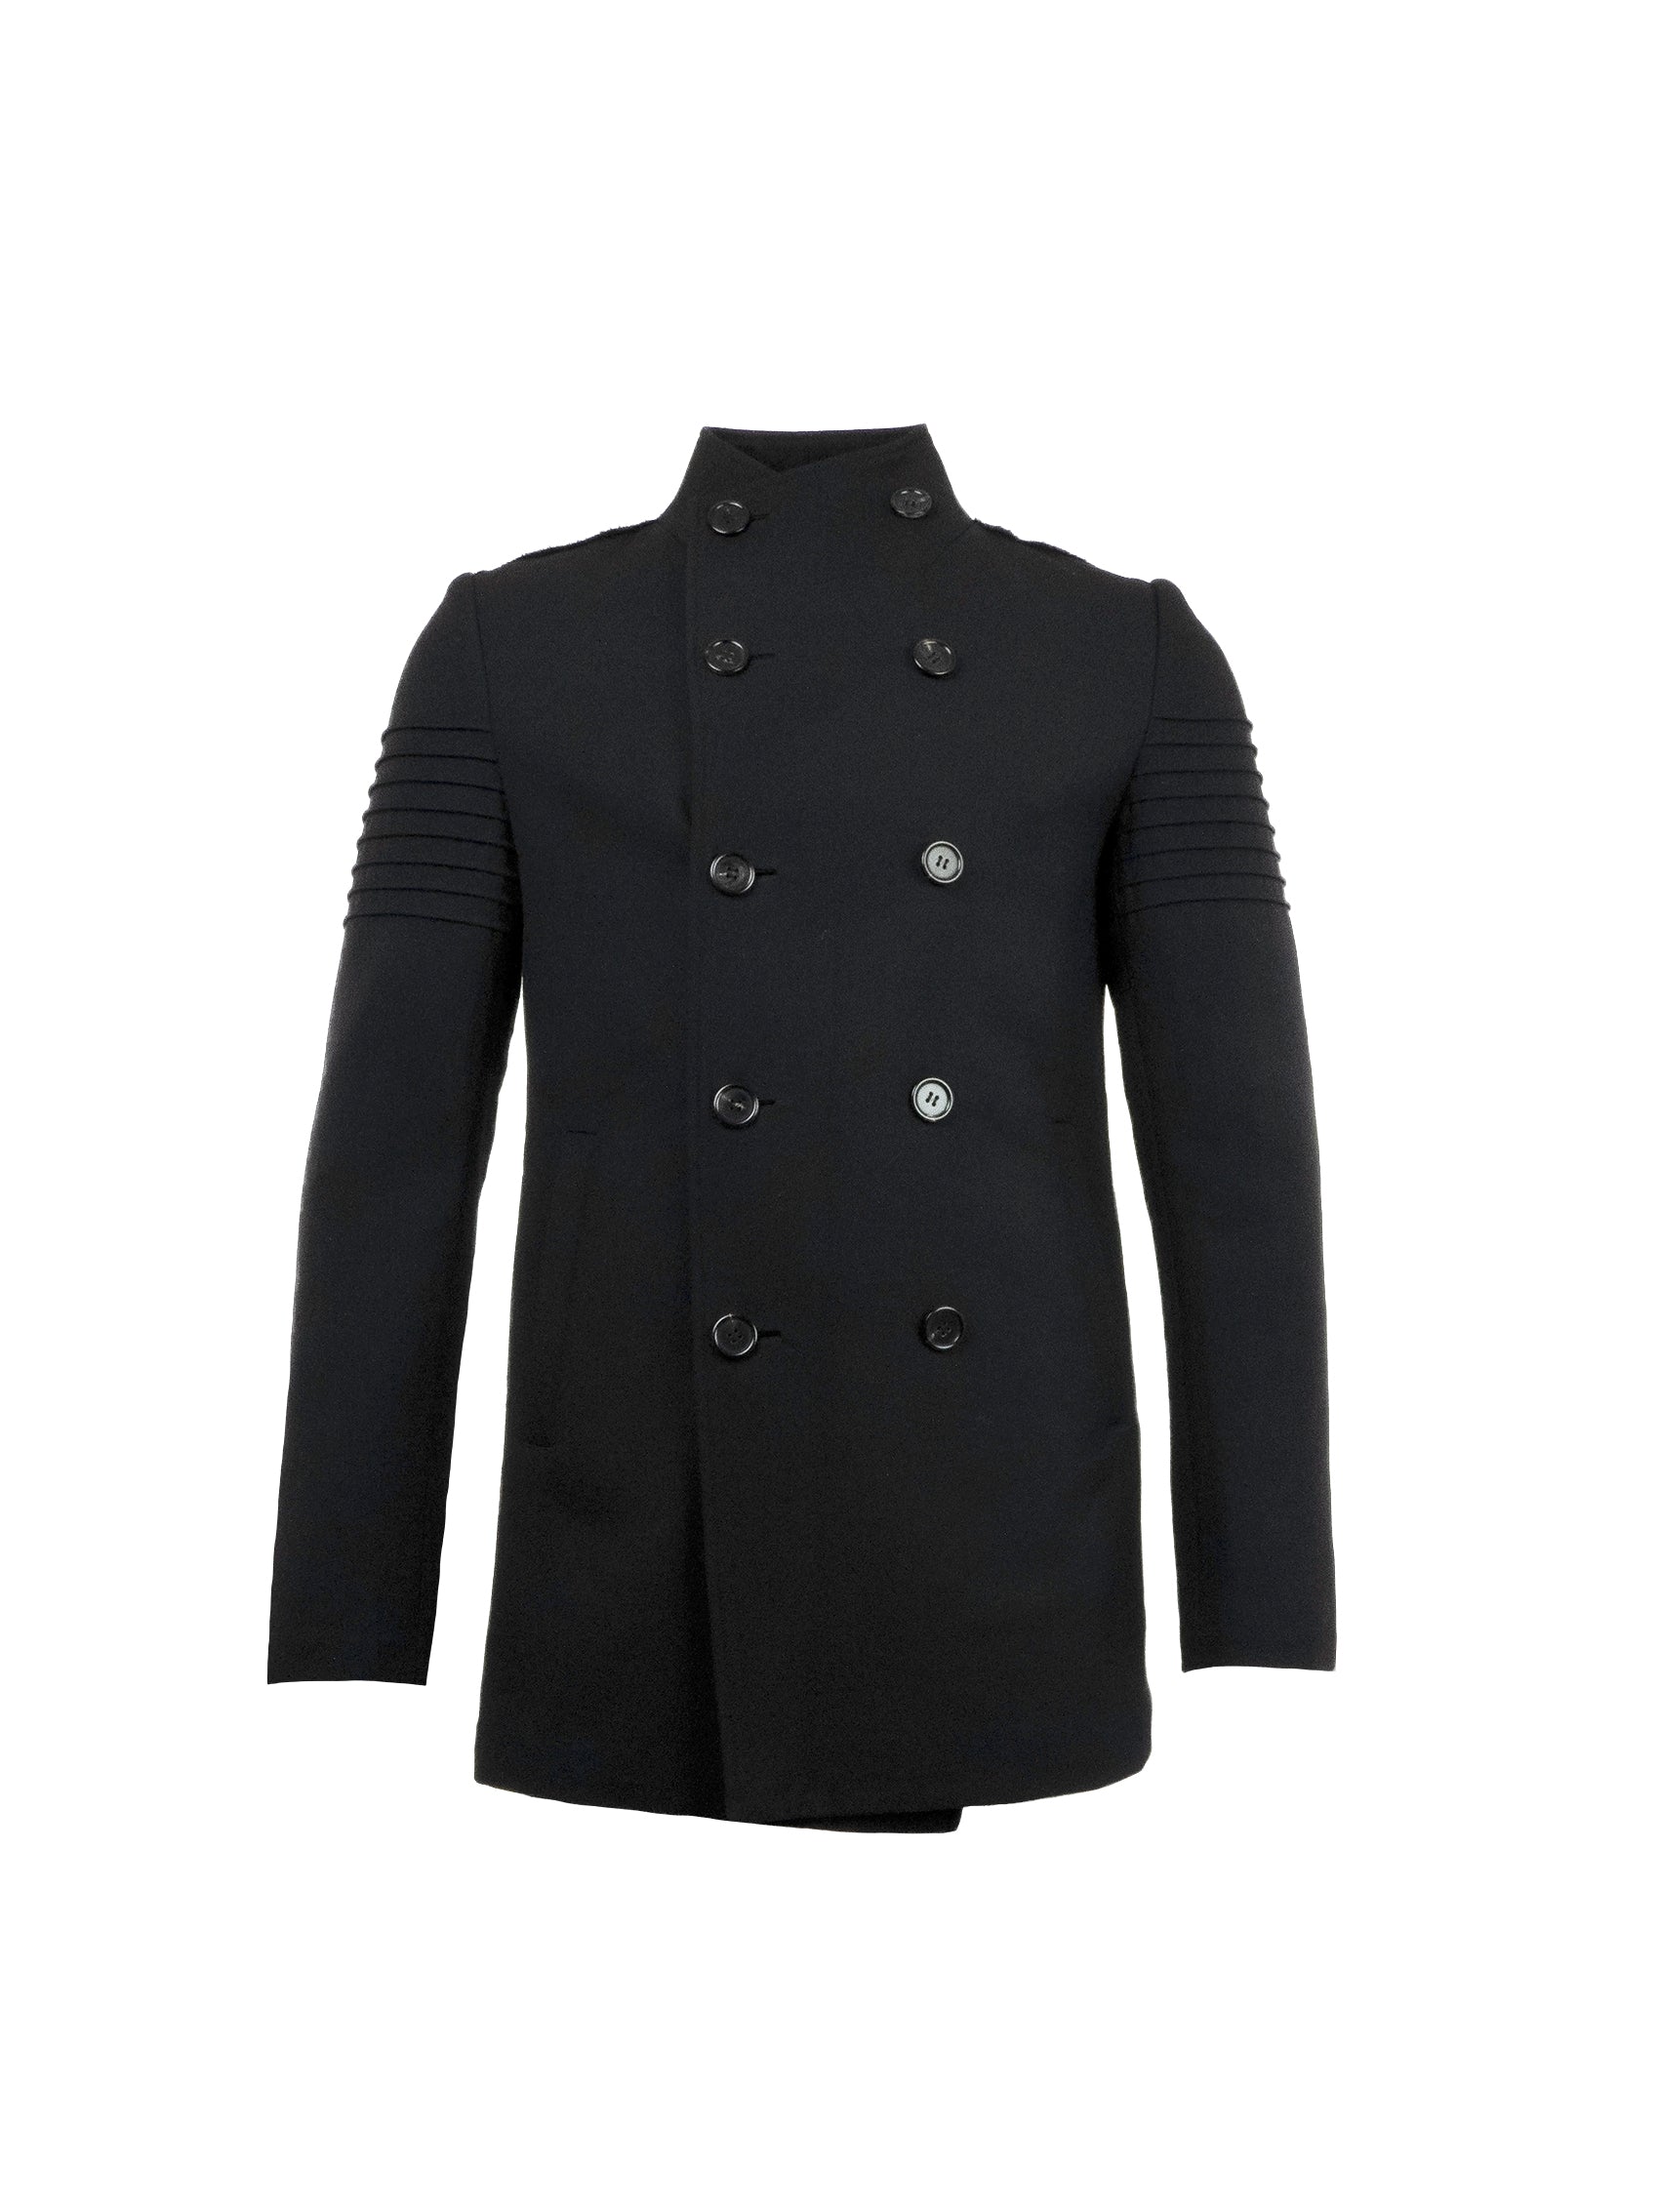 BLACK WOOL OVERCOAT WITH SUBTLE DISTRESSING